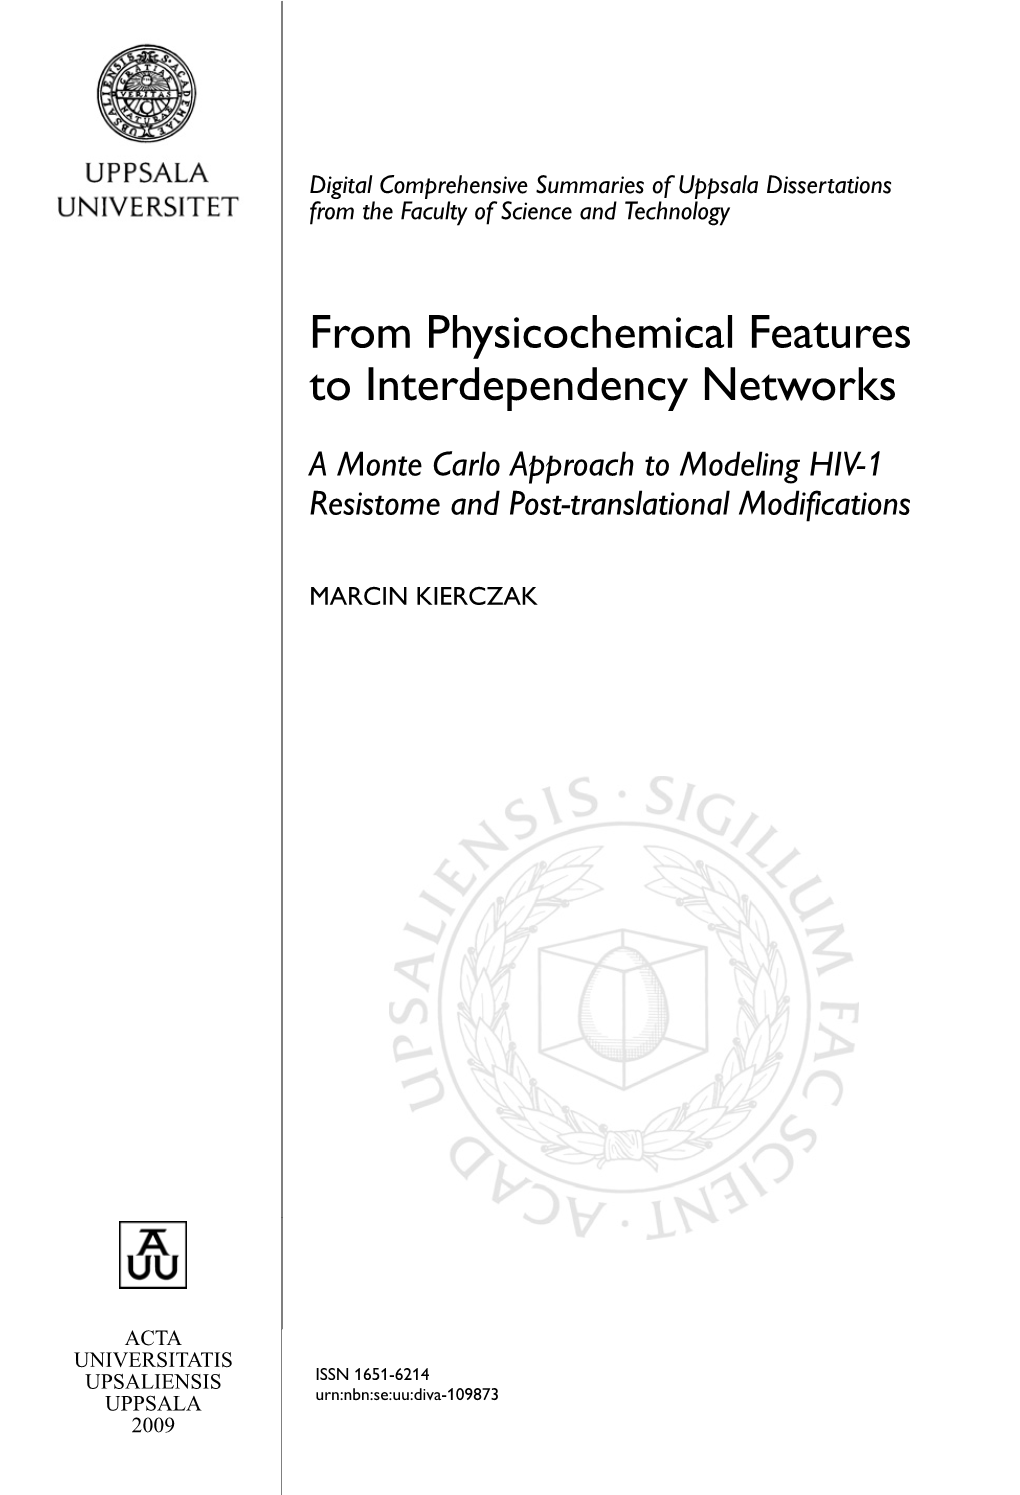 From Physicochemical Features to Interdependency